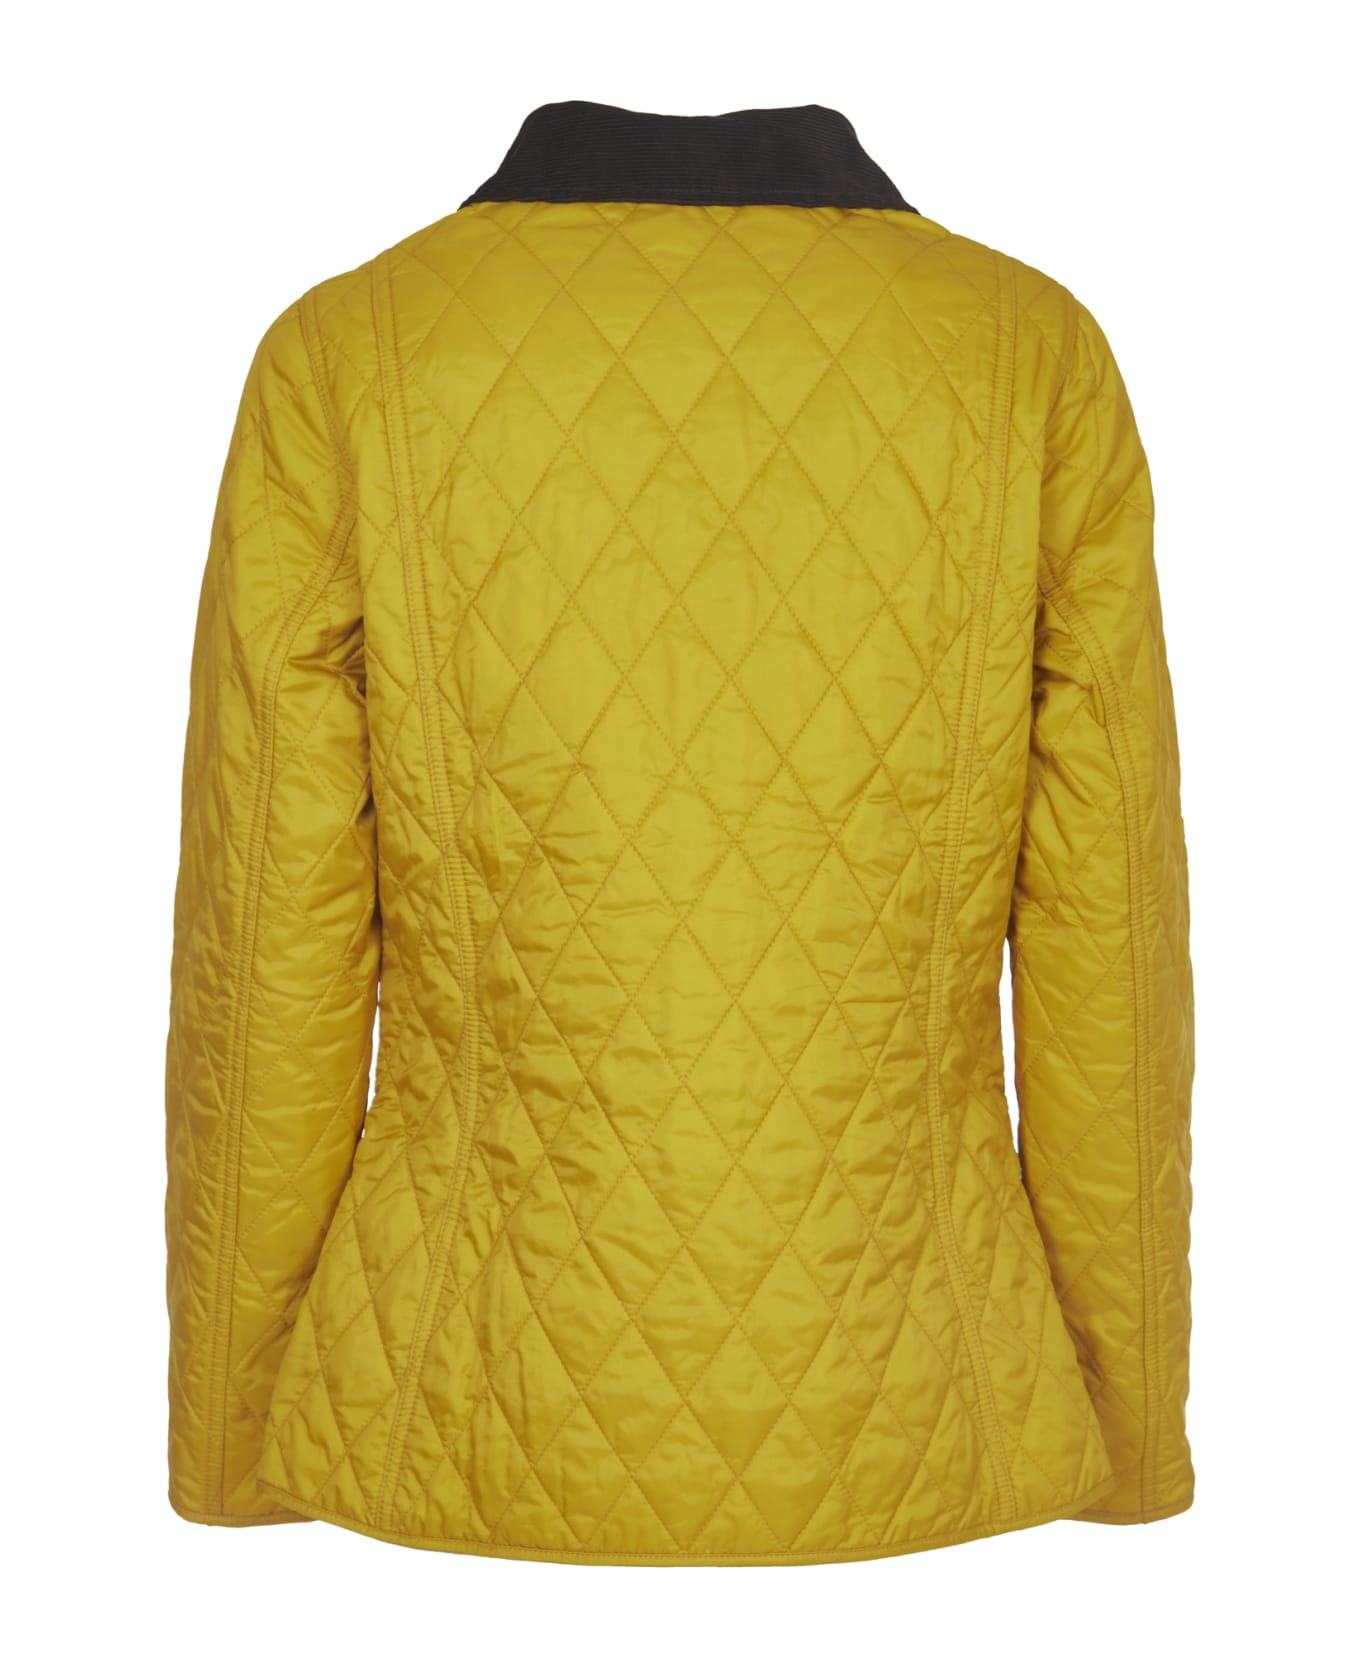 Barbour Yellow Quilted Annadale Jacket | italist